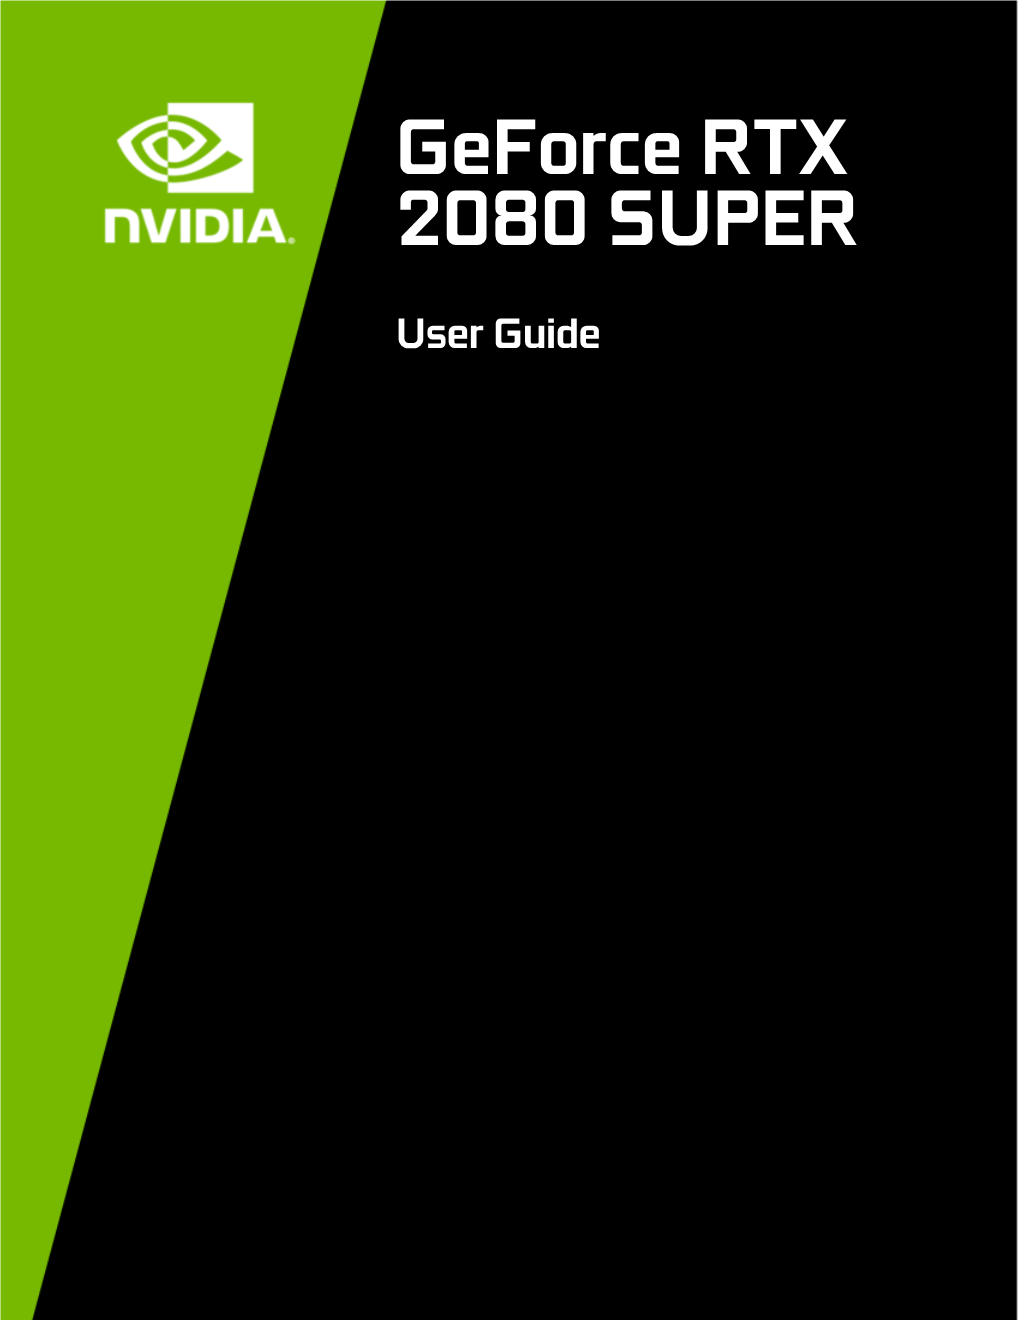 NVIDIA Geforce RTX 2080 SUPER User Guide | 3 Introduction